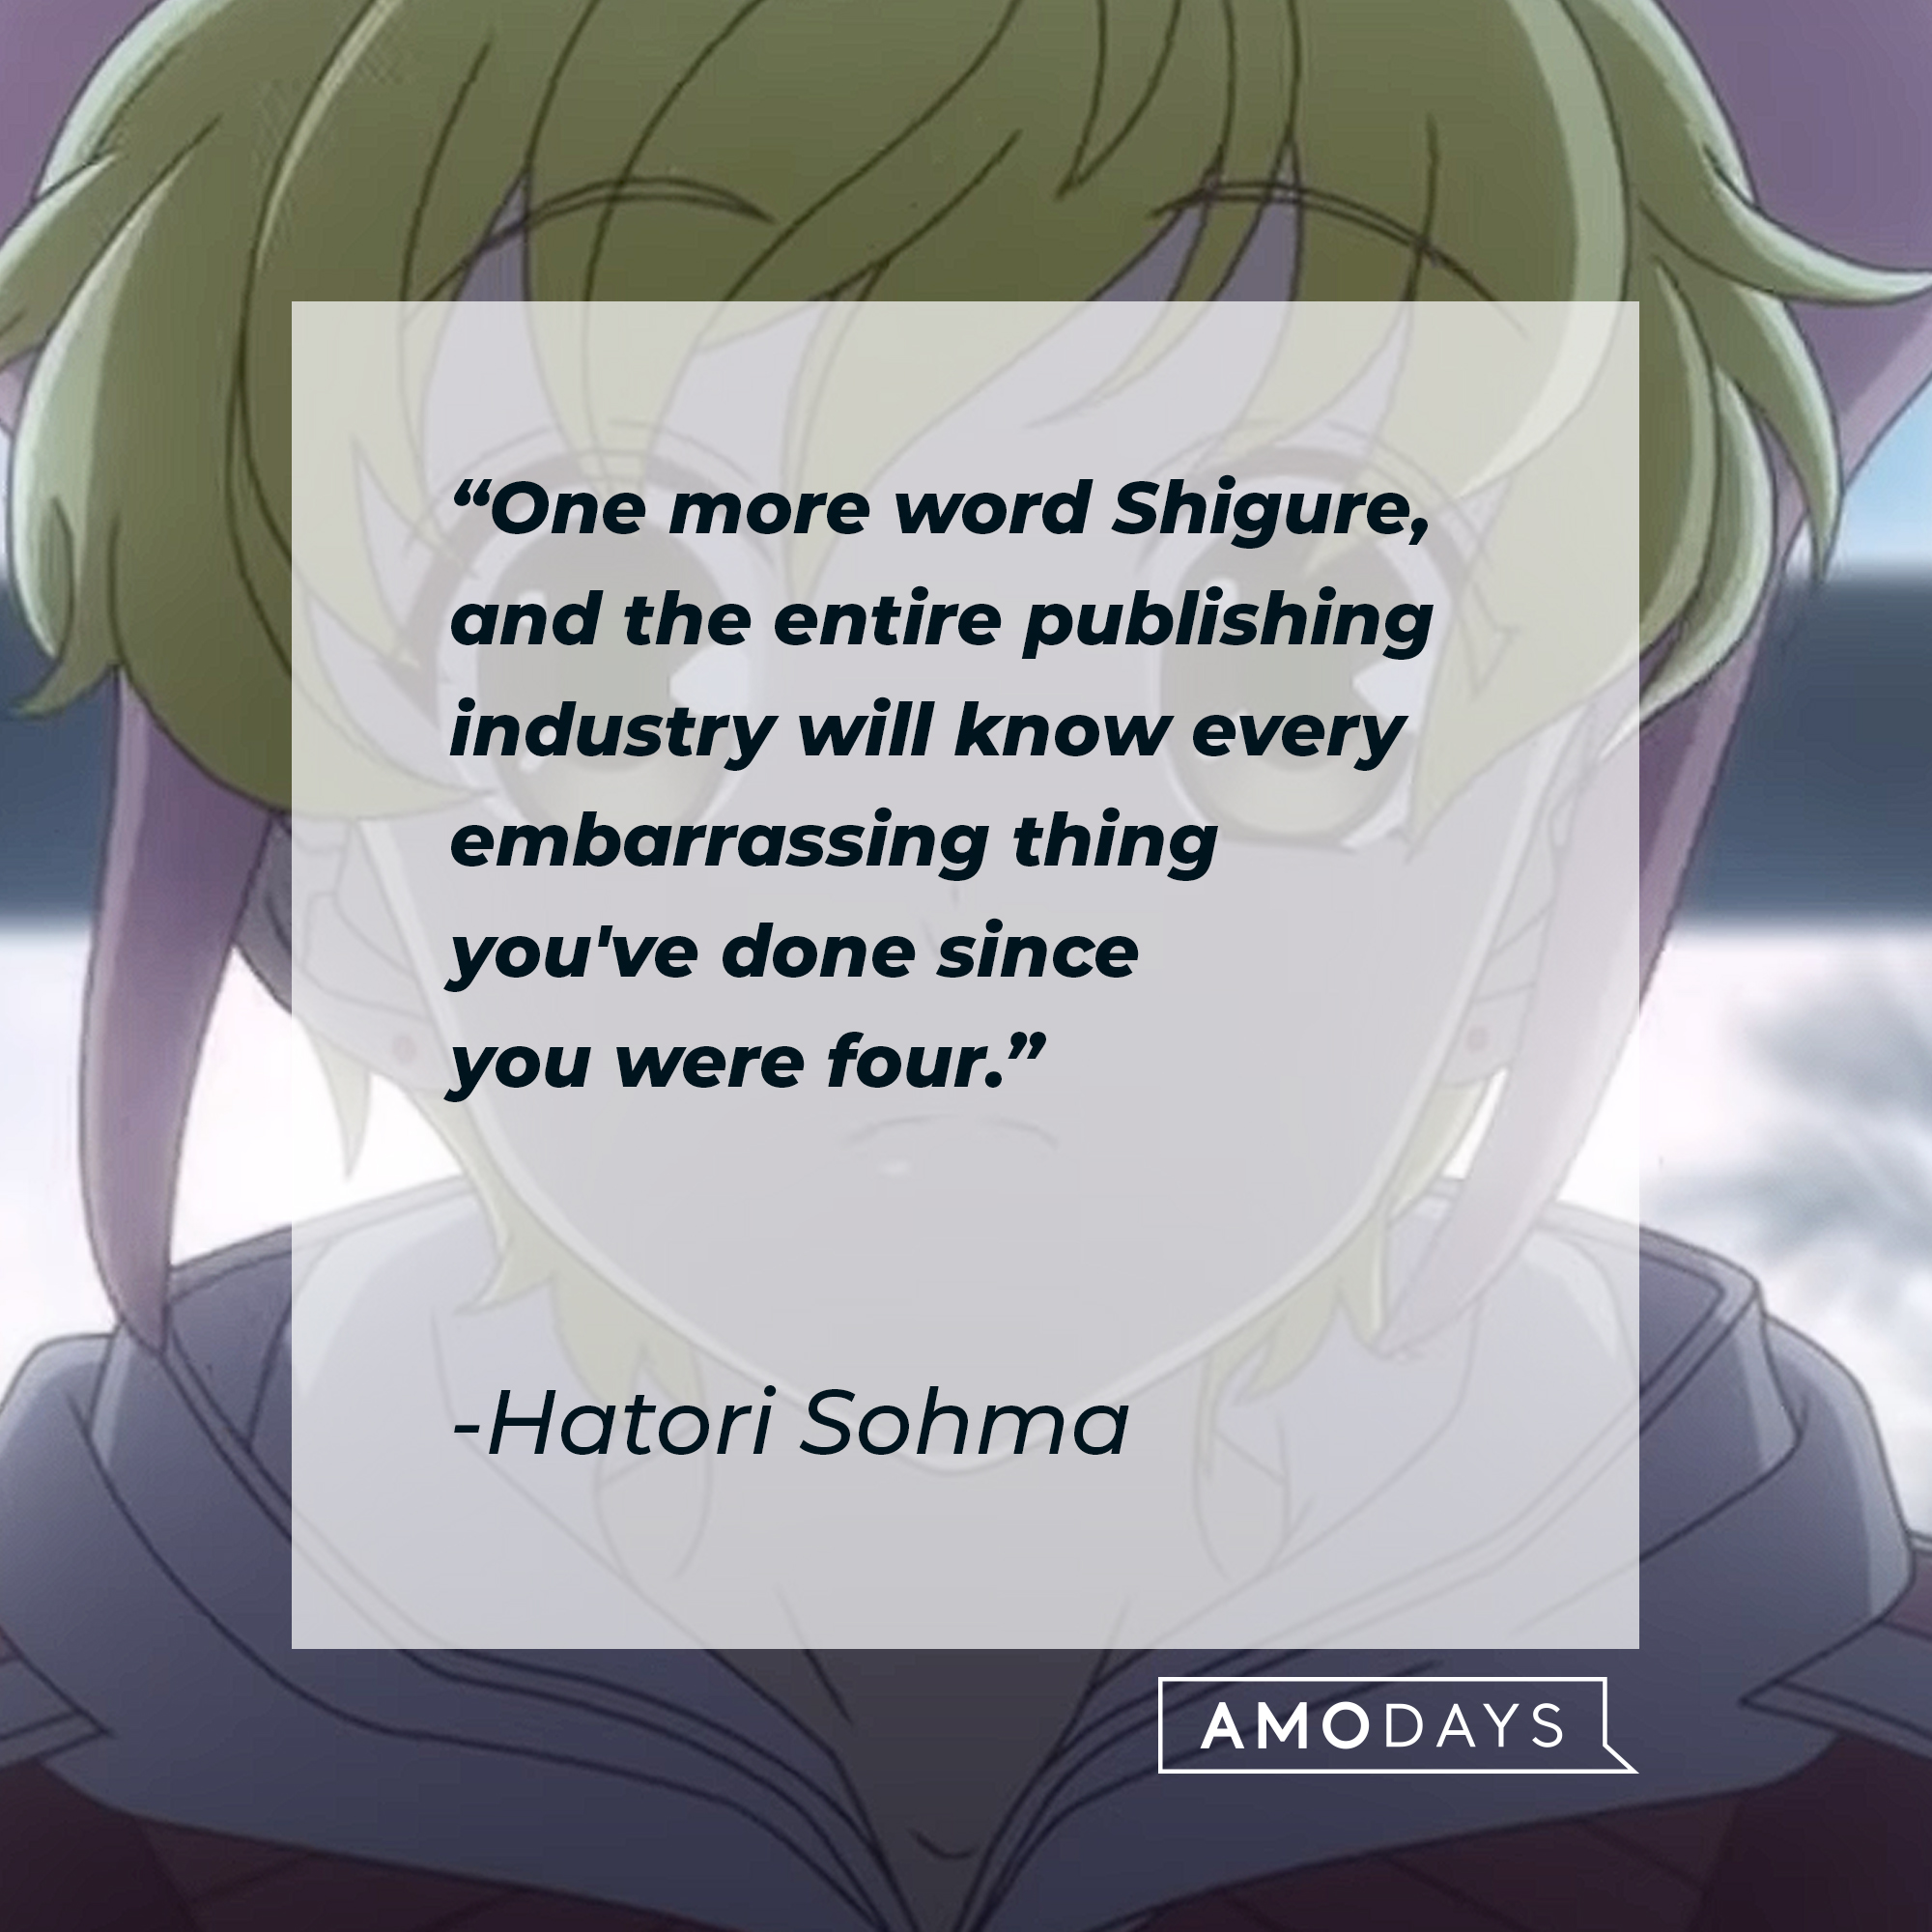 Hatori Sohma's quote: "One more word Shigure, and the entire publishing industry will know every embarrassing thing you've done since you were four." | Image: youtube.com/Crunchyroll Collection